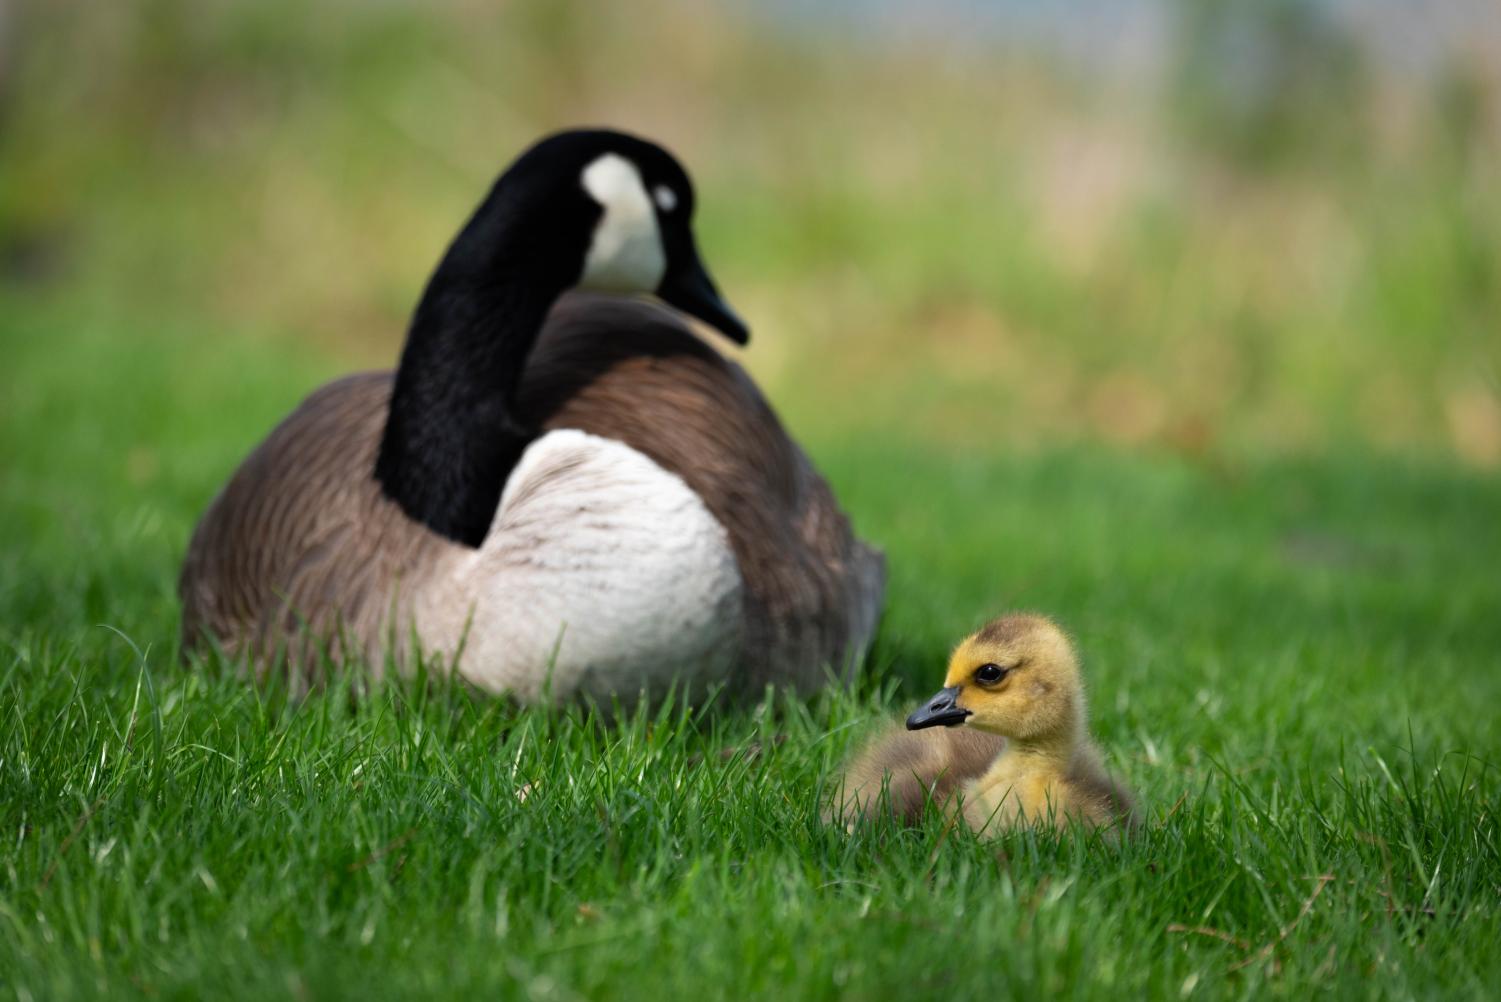 A young gosling and a goose sit on grass.